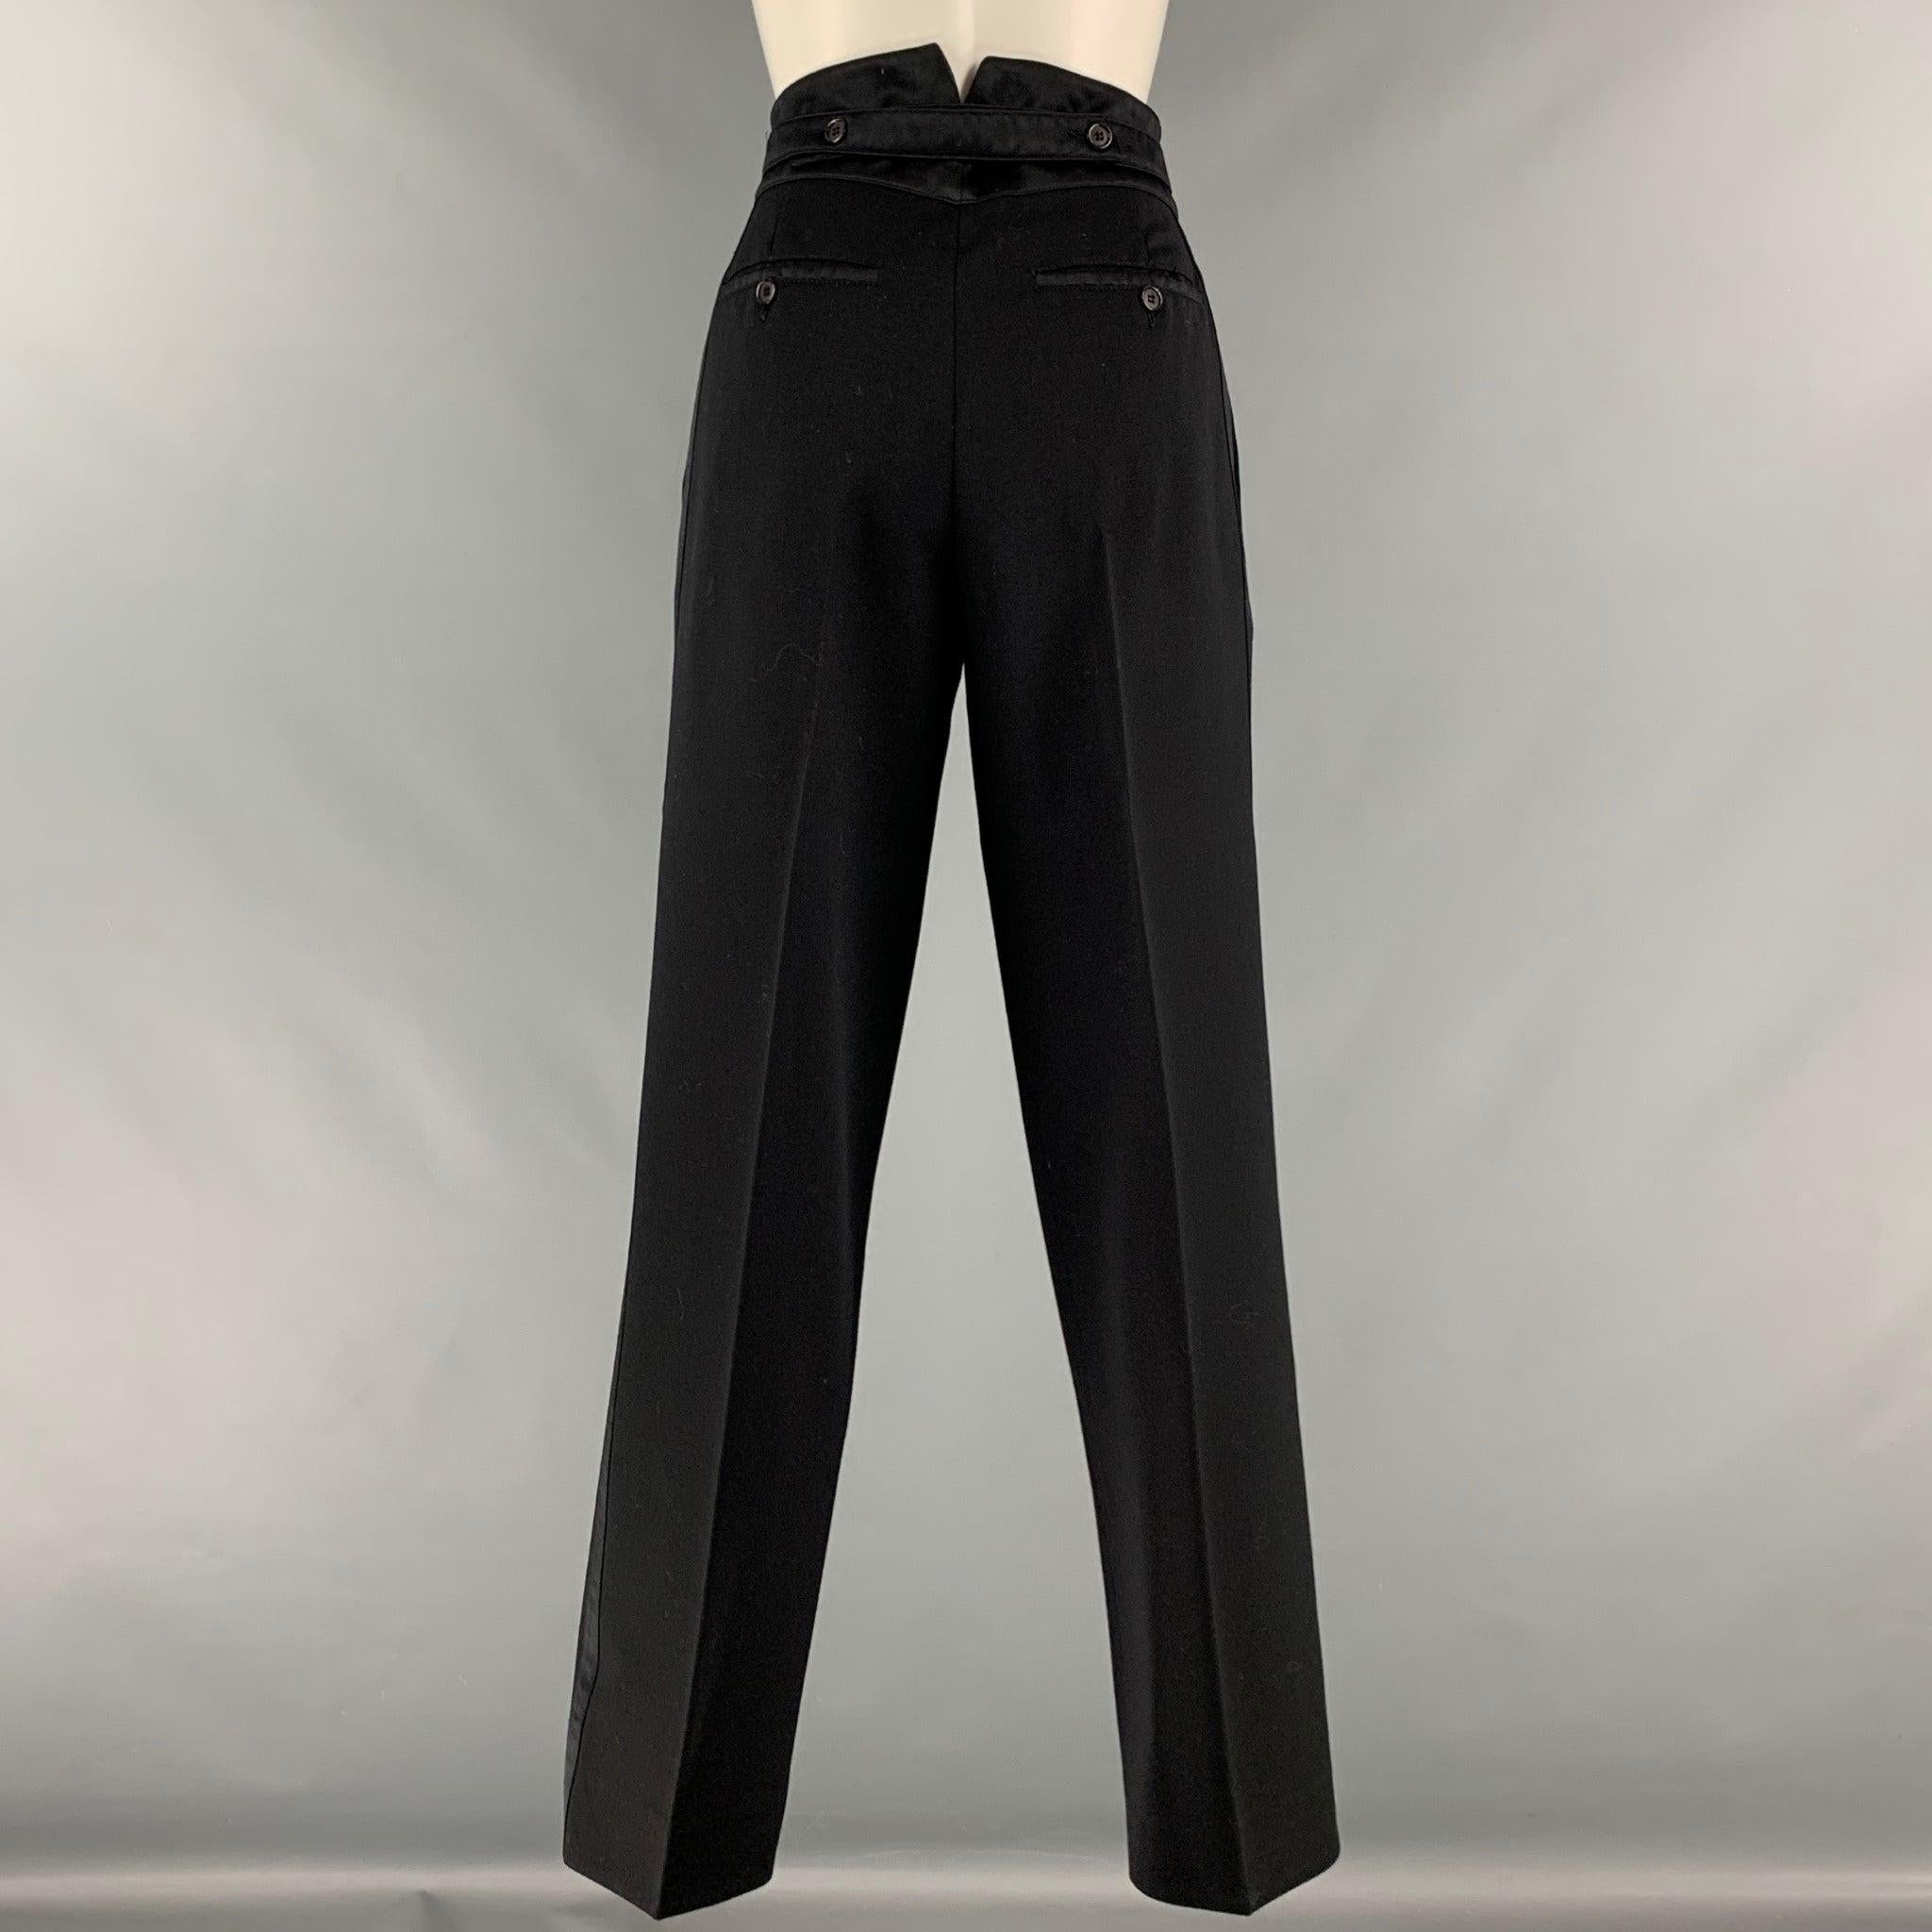 CLAUDE MONTANA Size 12 Black Silk Double Breasted Pants Suit For Sale 3